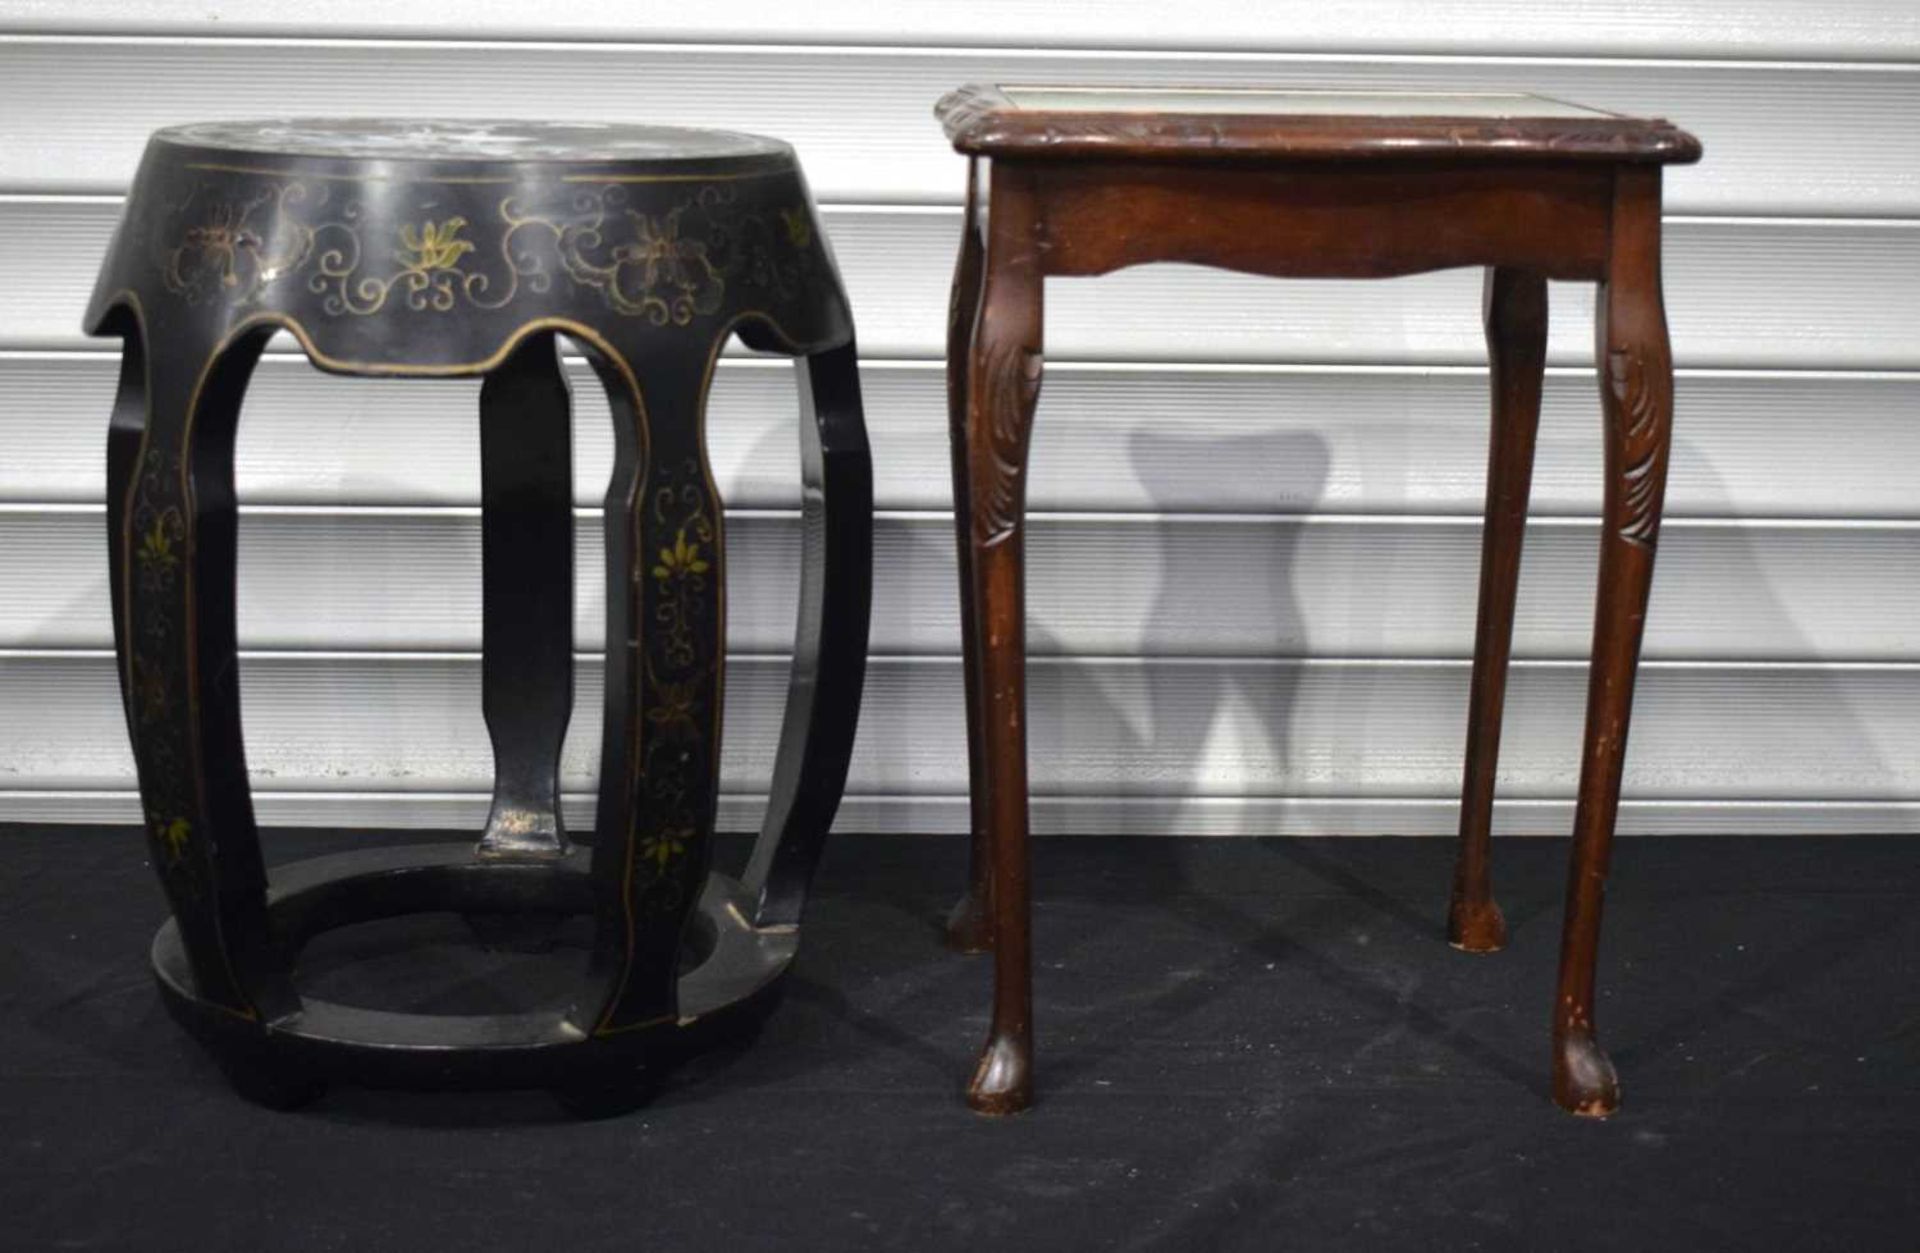 A Black lacquered stool with a mother of Pearl inlaid top together with a leather topped side table.